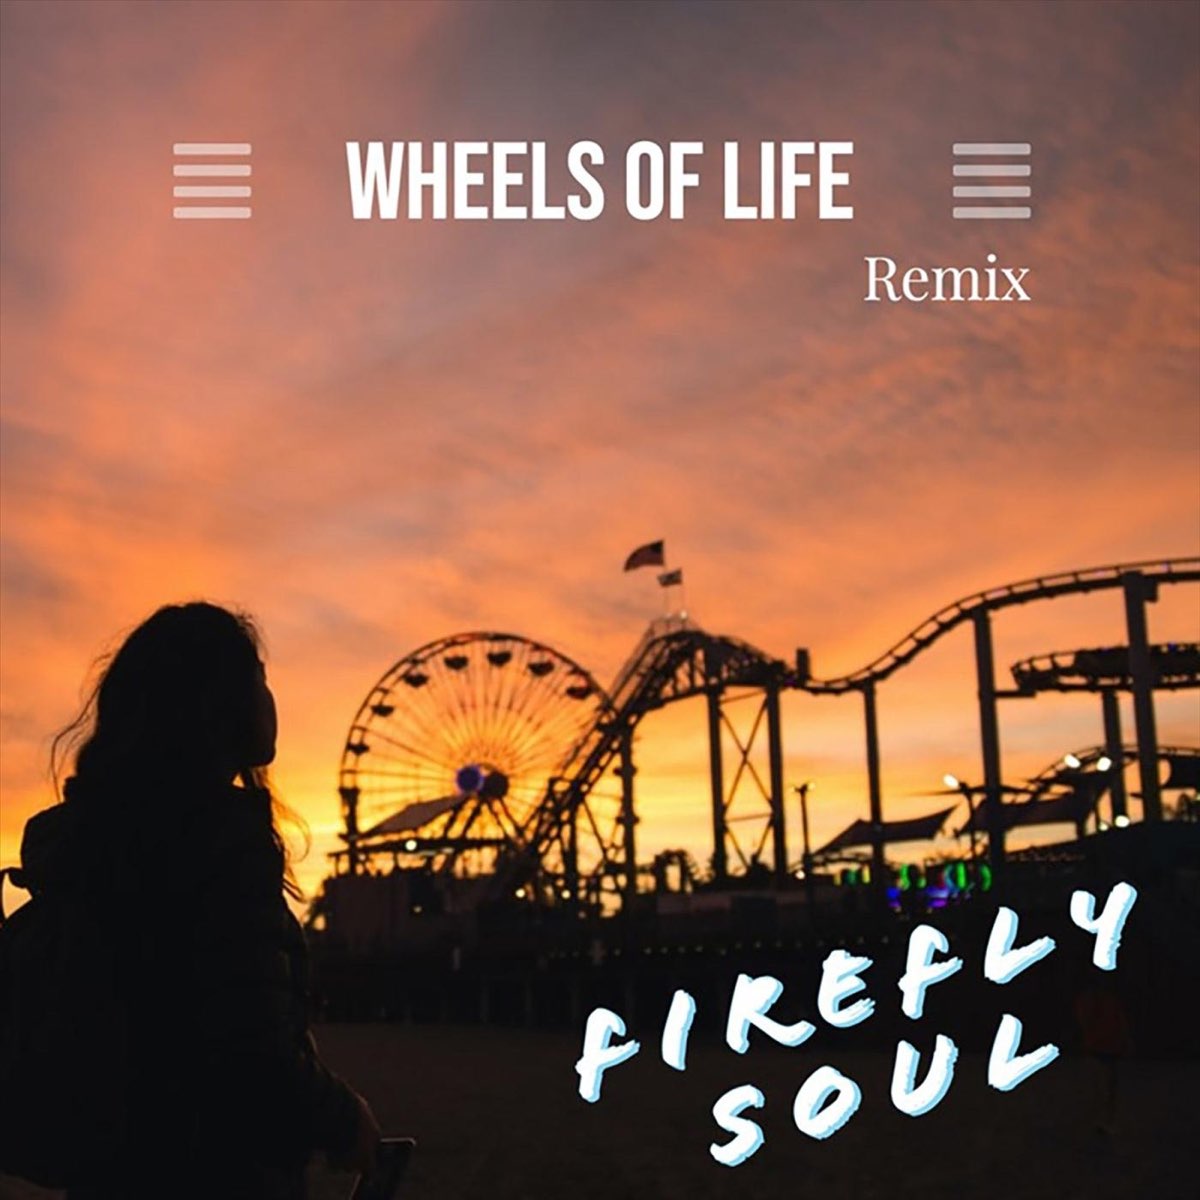 Love life remake. Ремикс лайф. Time of my Life ремикс. Fireflies discography. End of Life Remix-Cover.